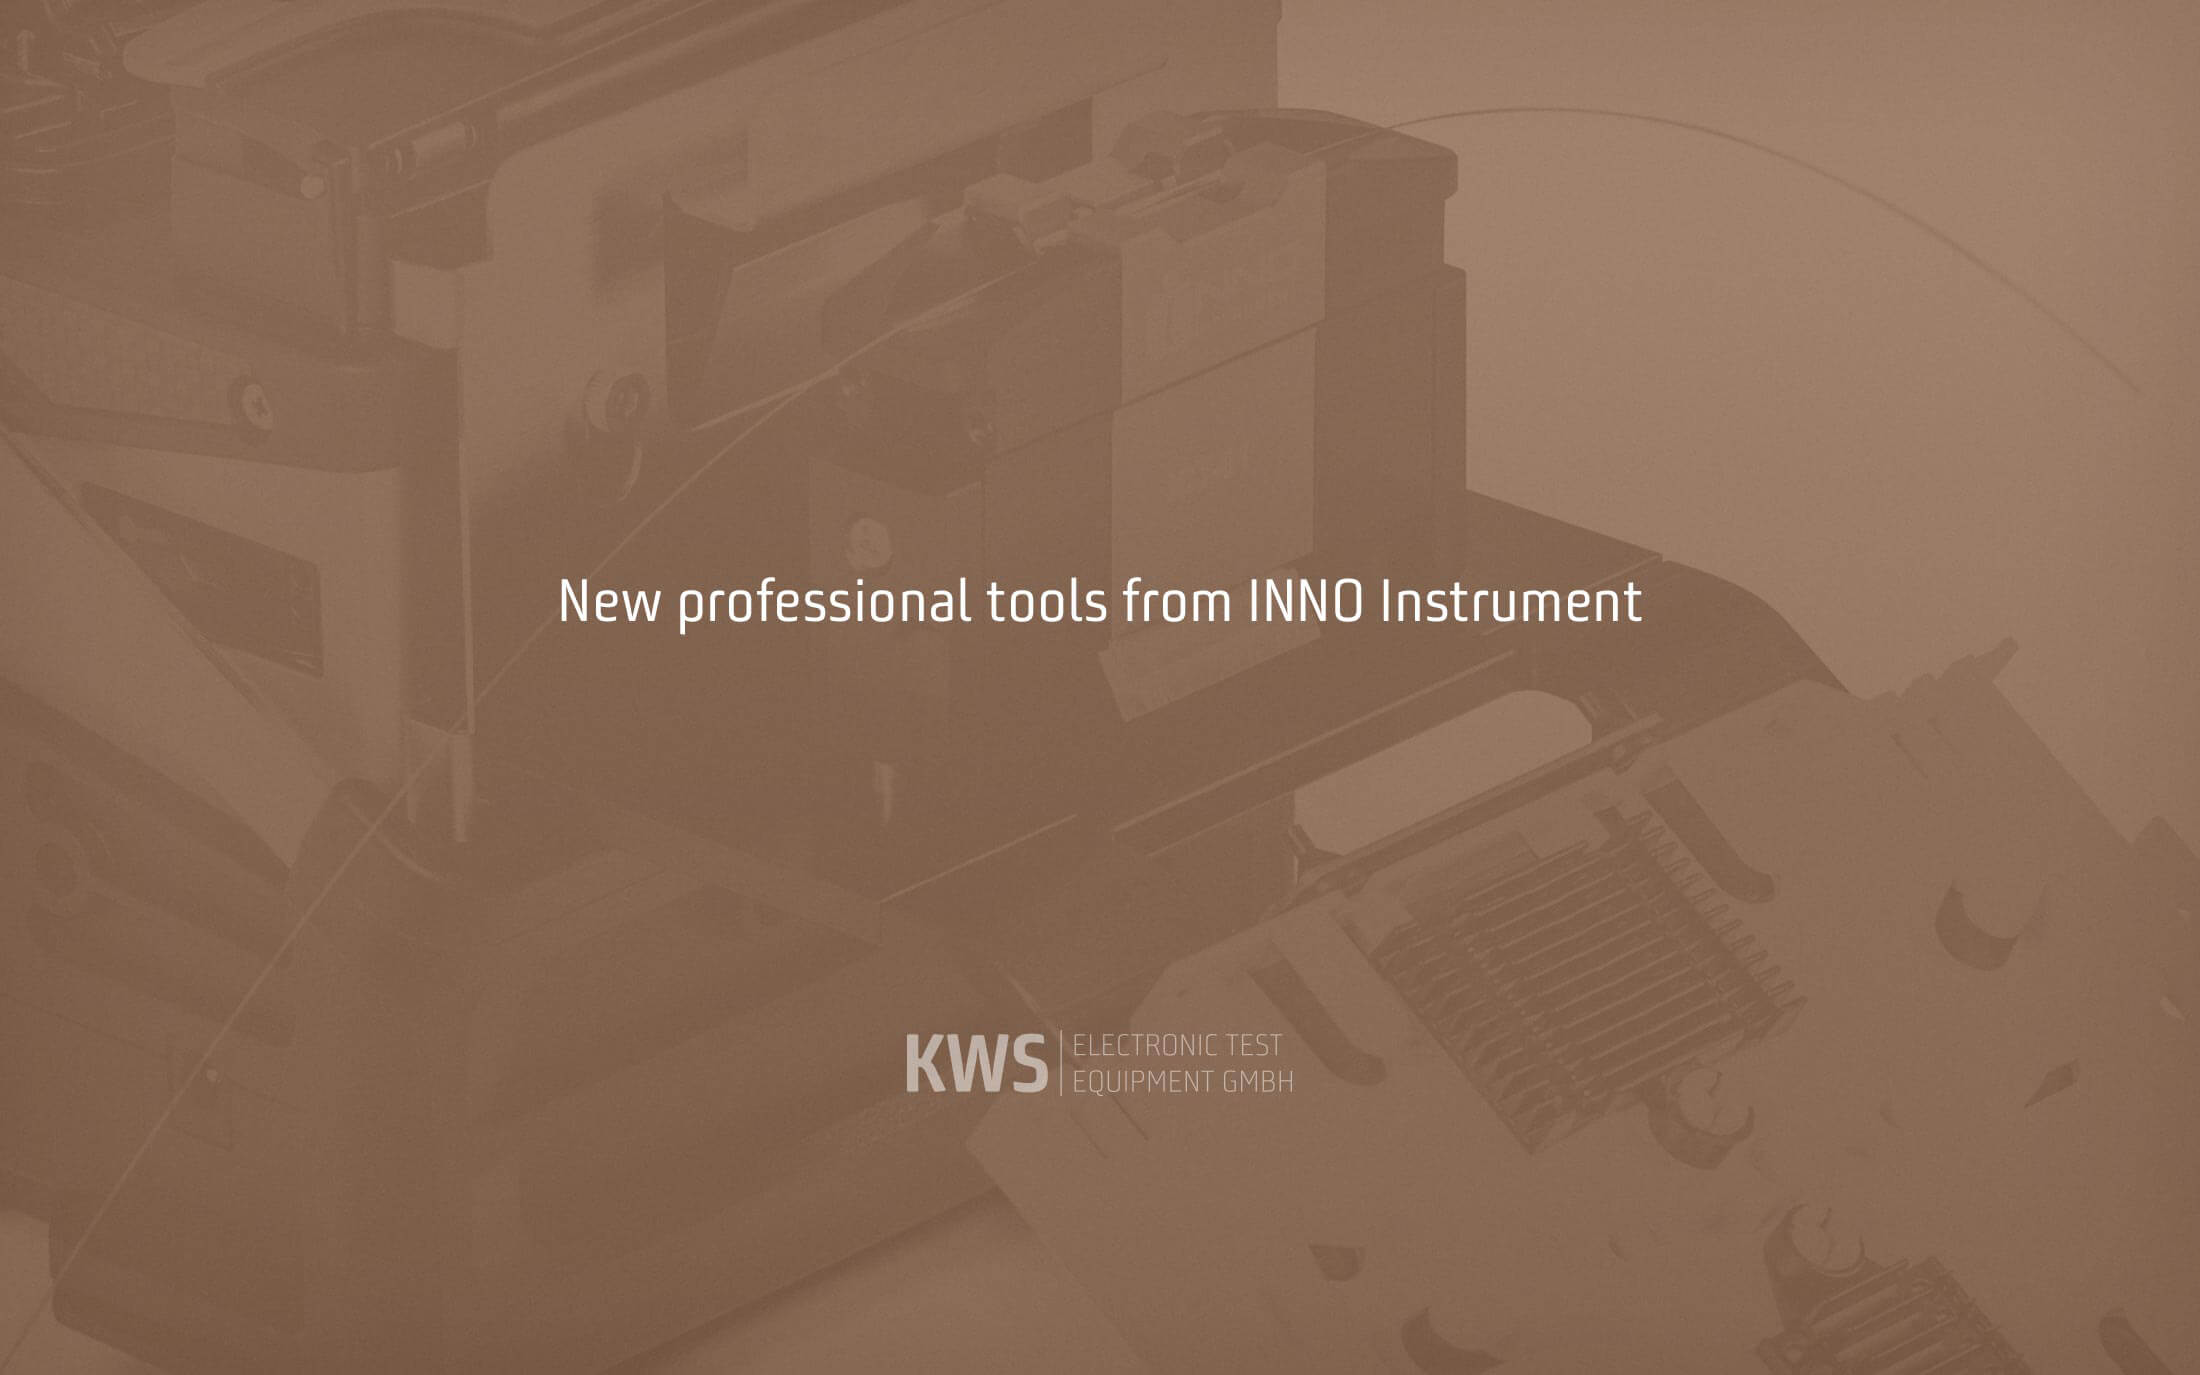 KWS Electronic News 2020: New tools from INNO Instrument